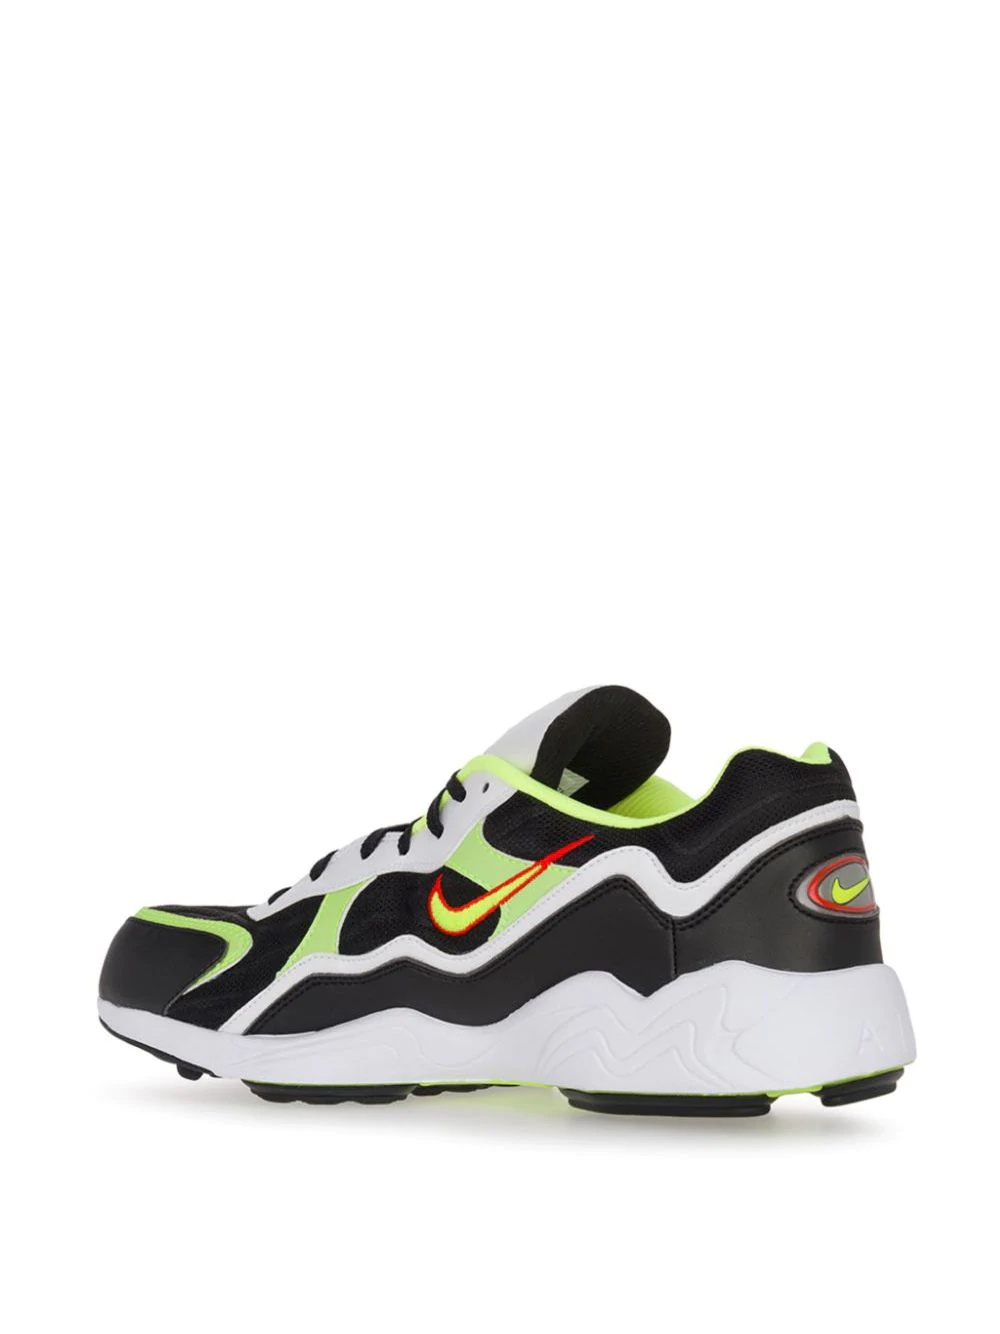 Air Zoom Alpha "Black/Volt/Habanero Red/White" sneakers - 3